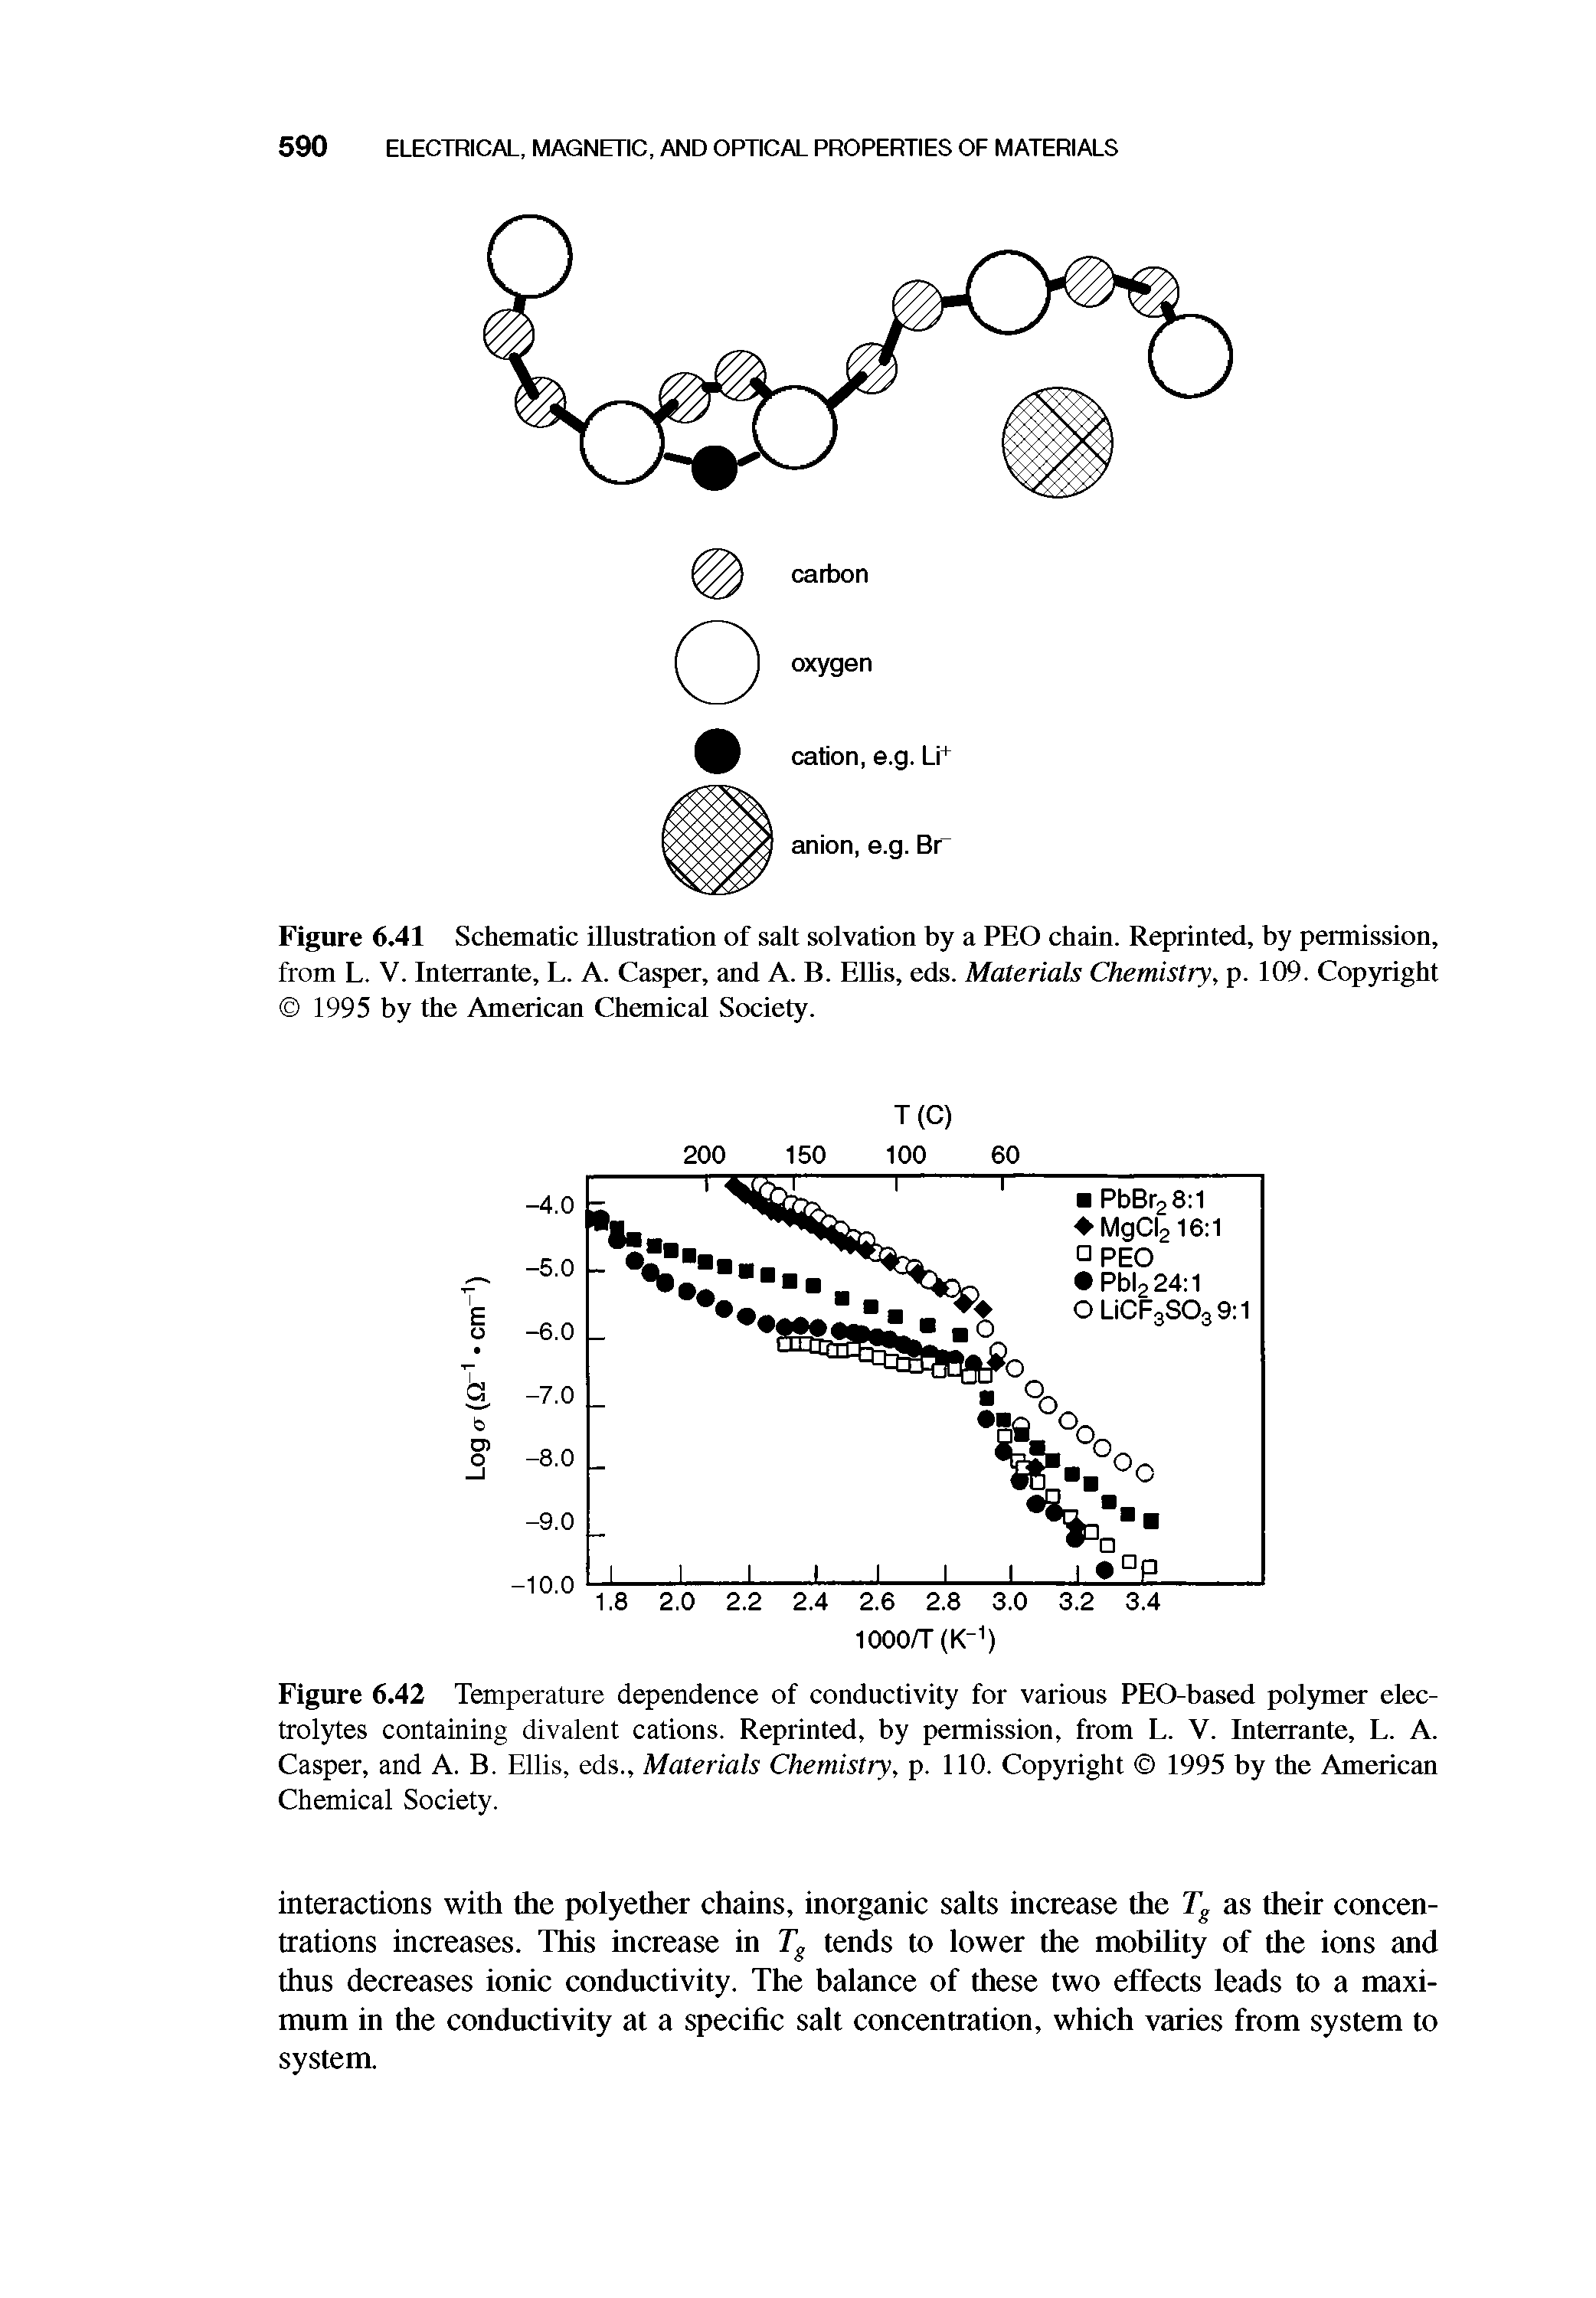 Figure 6.42 Temperature dependence of conductivity for various PEO-based polymer electrolytes containing divalent cations. Reprinted, by permission, from L. V. Interrante, L. A. Casper, and A. B. Ellis, eds.. Materials Chemistry, p. 110. Copyright 1995 by the American Chemical Society.